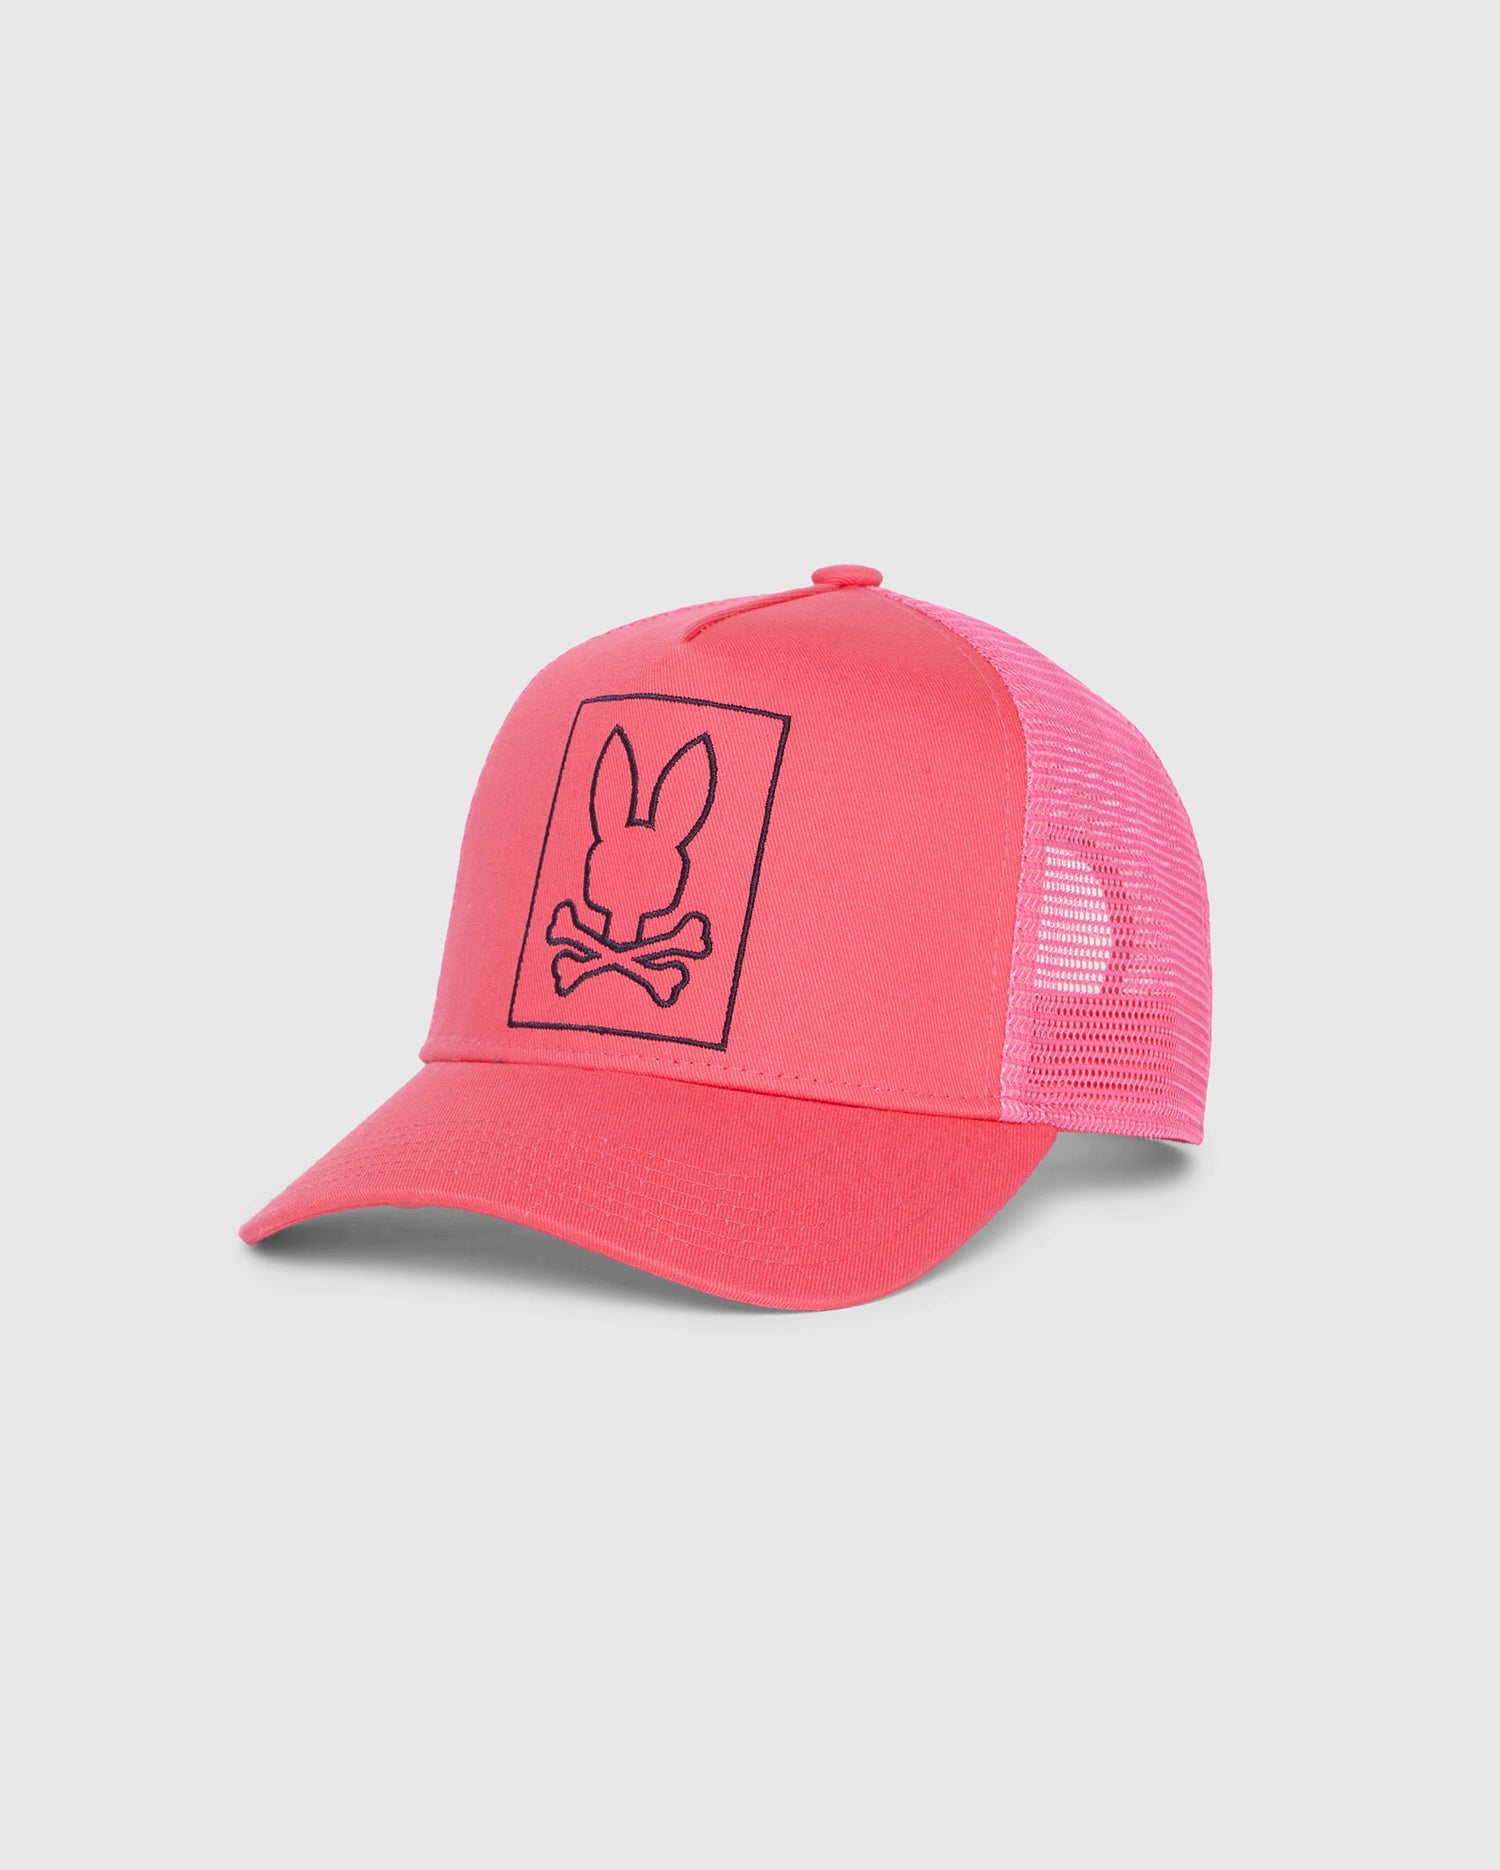 A vibrant pink MENS LIVINGSTON TRUCKER CAP - B6A401B200 with a mesh back and adjustable snapback fastening. The front panel features a black outline of a bunny head with crossbones underneath, giving the cap a unique and edgy look. Set against a plain white background, this bunny design truly stands out. This stylish cap is brought to you by Psycho Bunny.